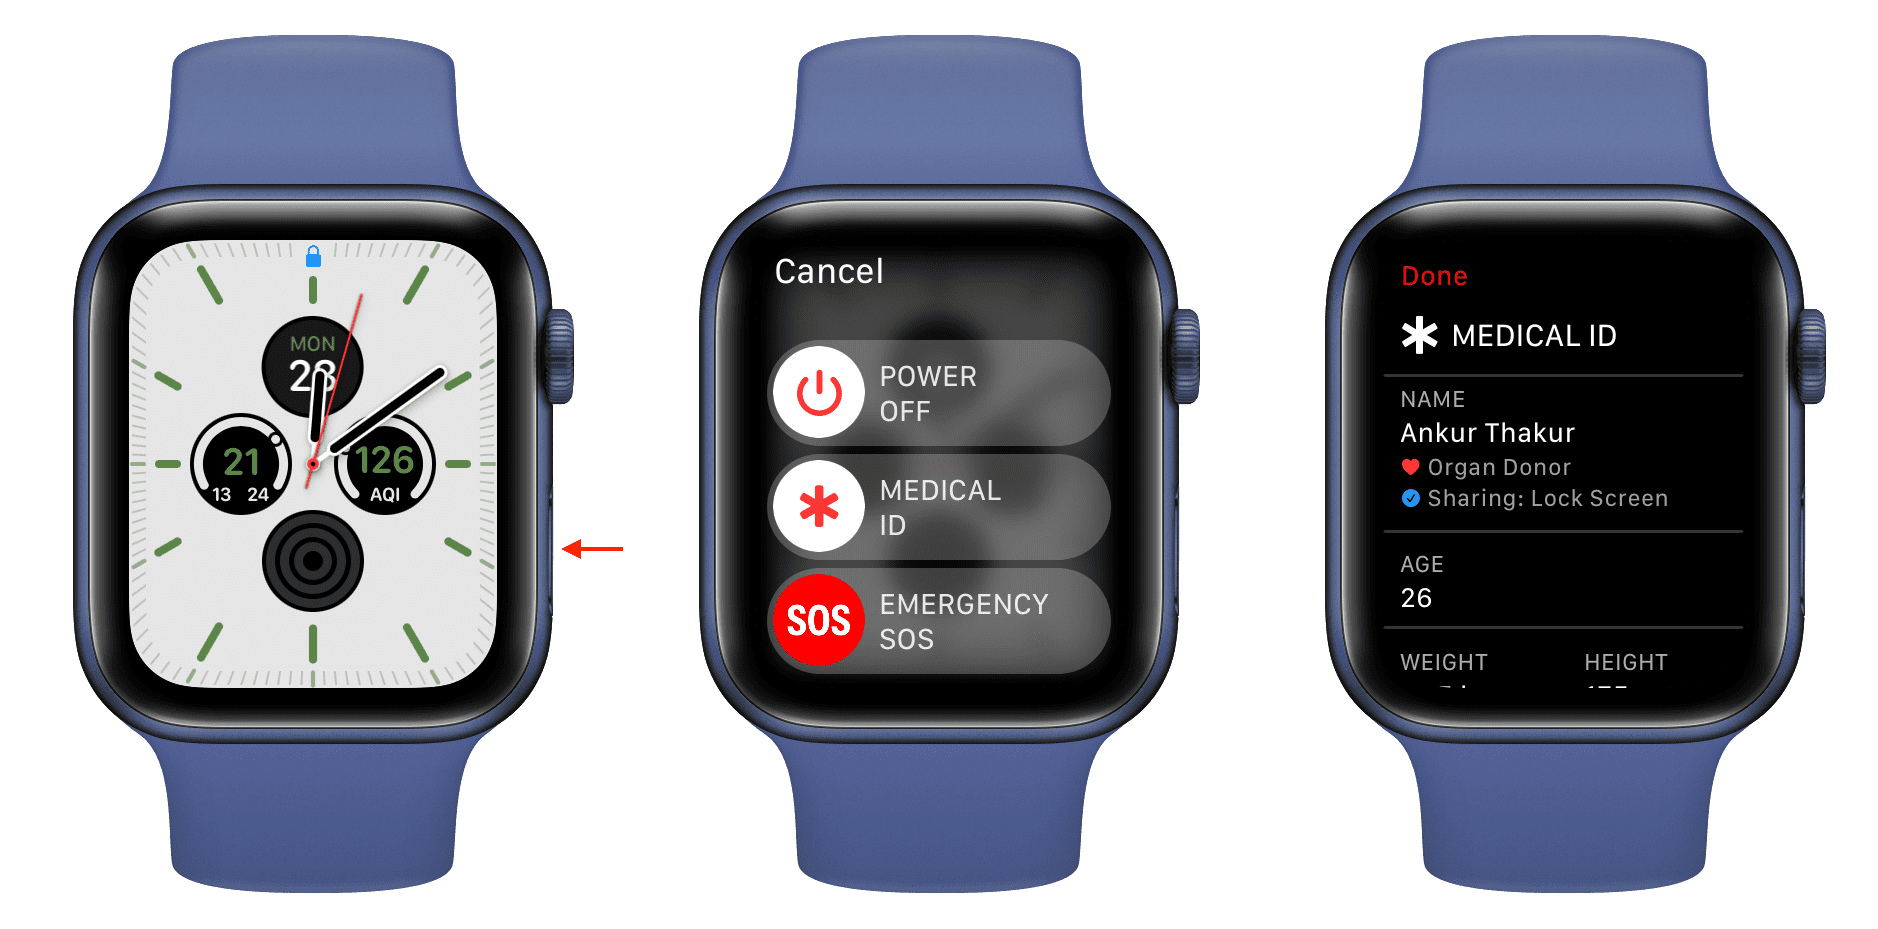 See Medical ID on Apple Watch